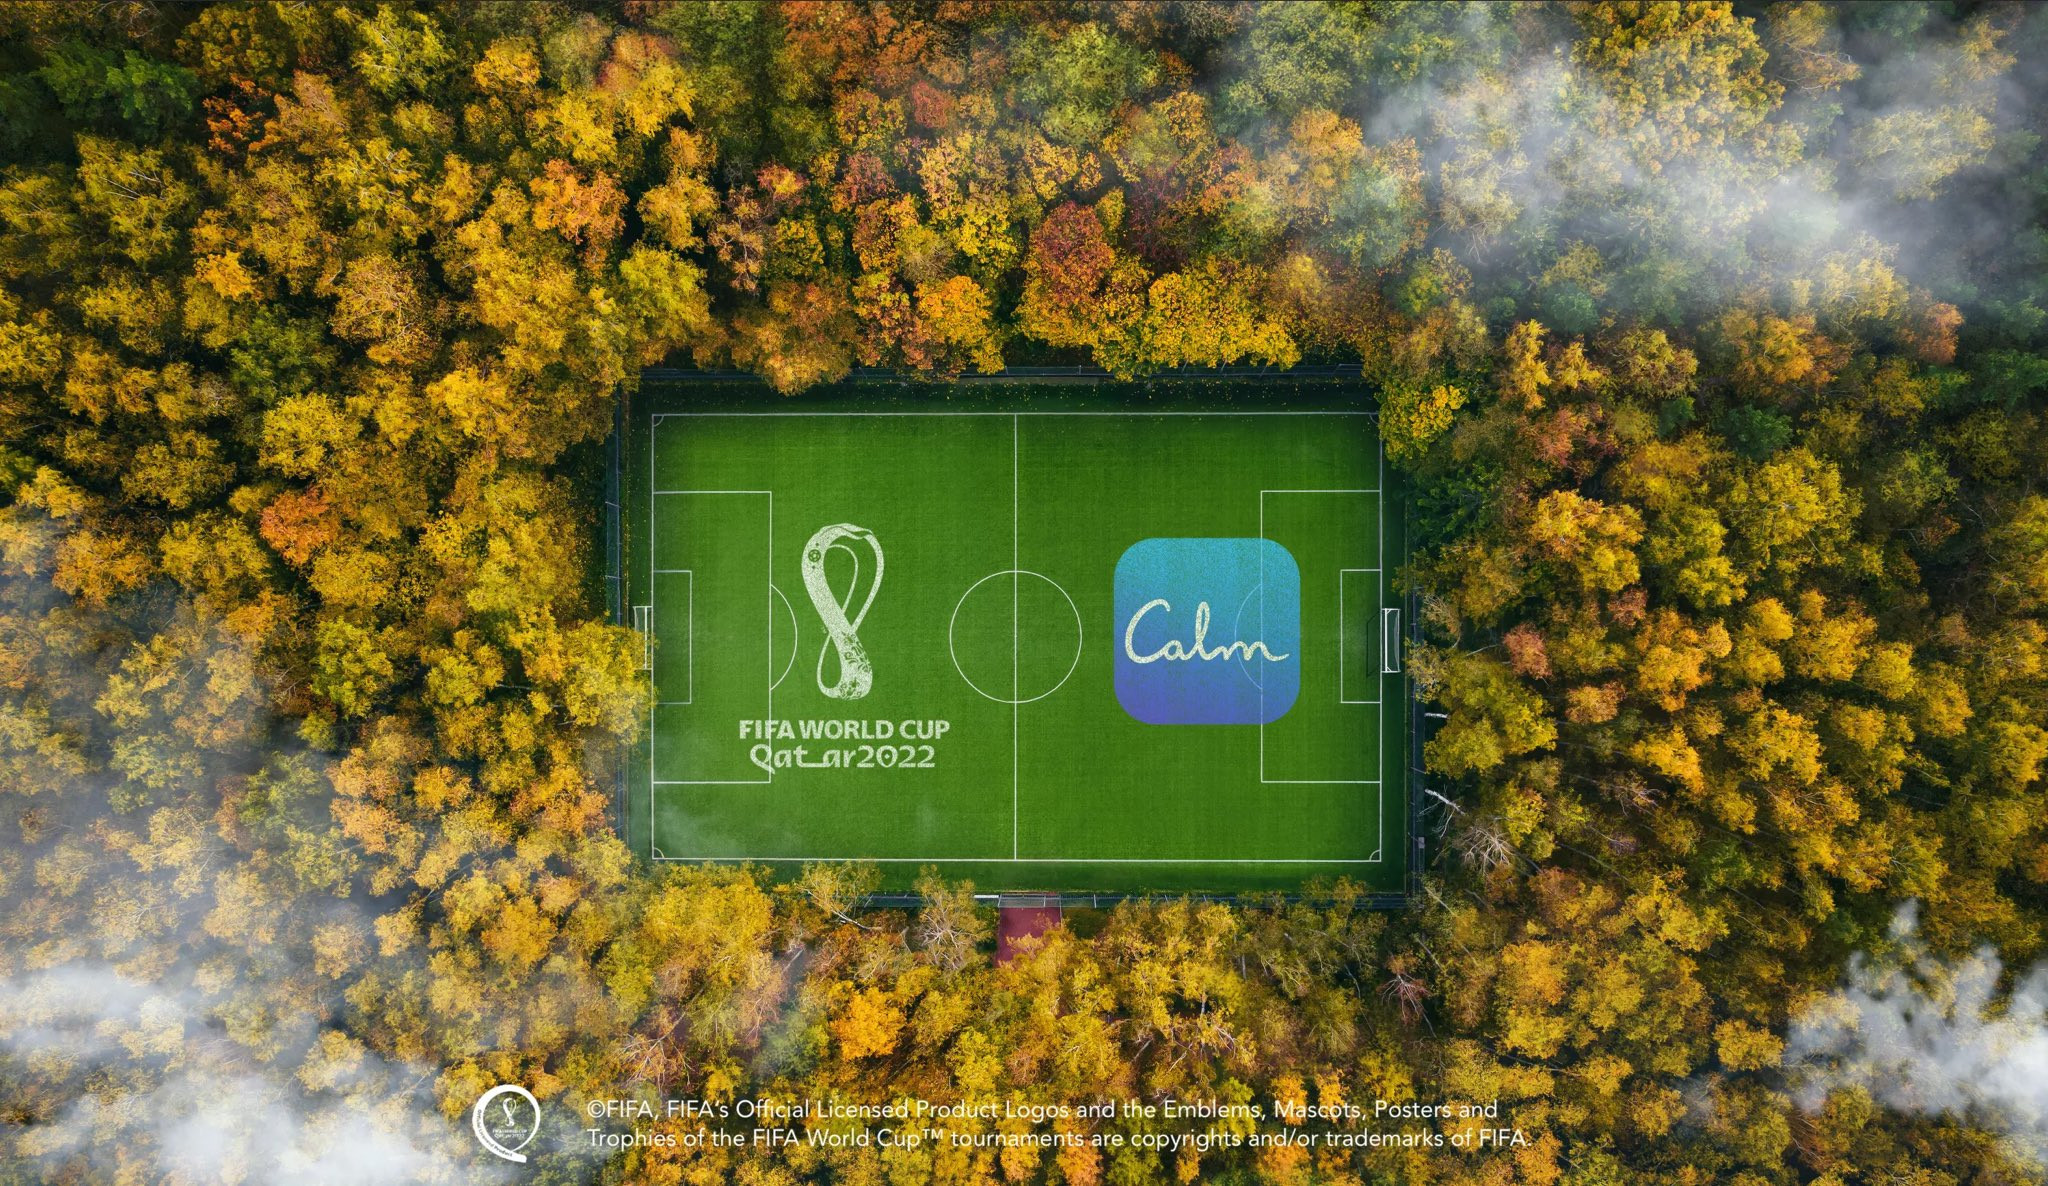 Calm named official mindfulness and meditation product for FIFA World Cup